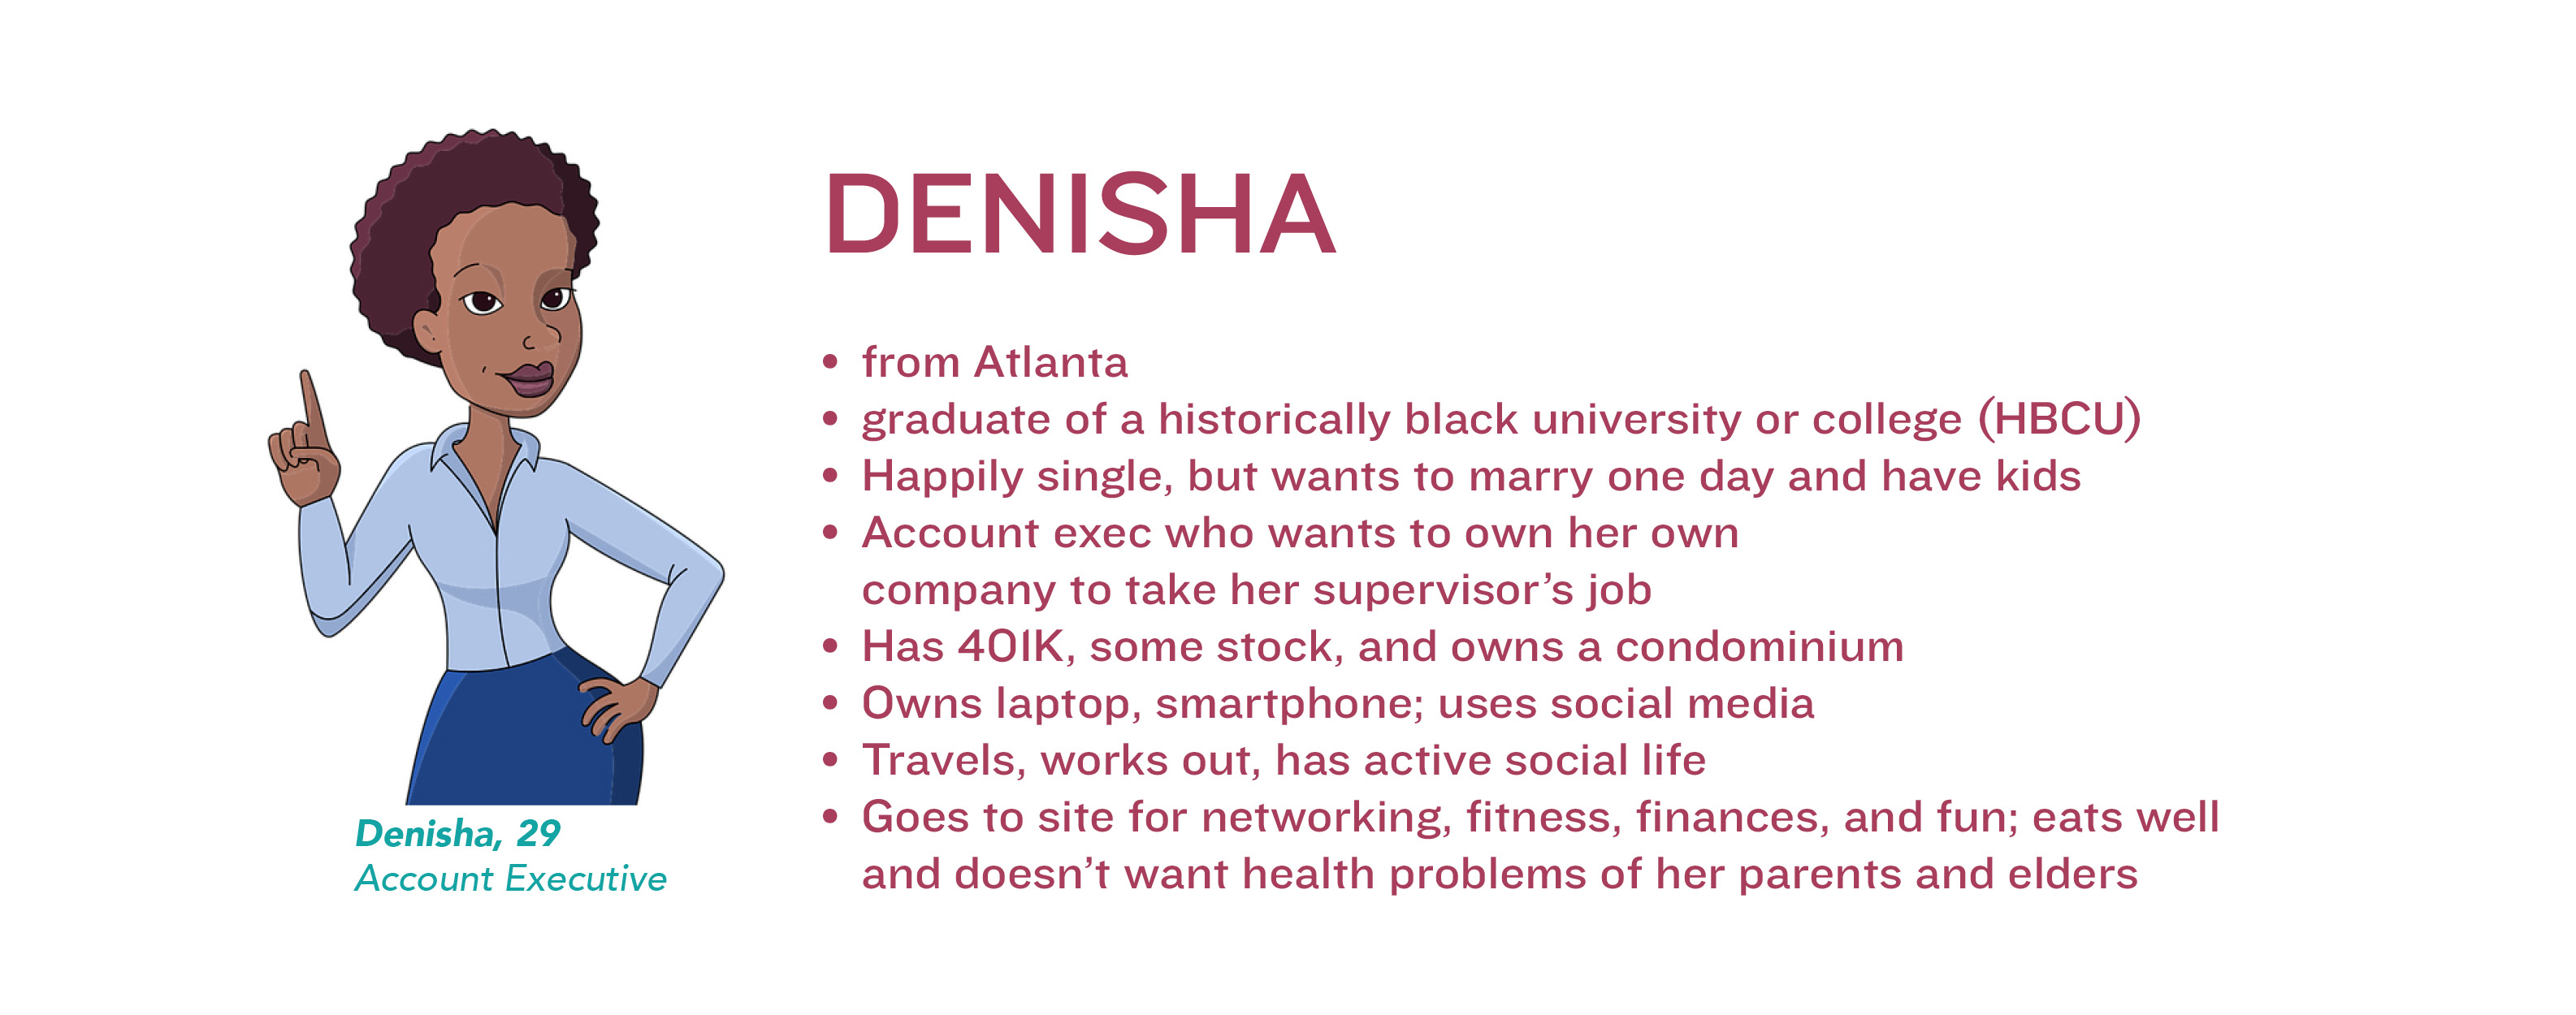 This user persona portrays a young account executive named Denisha. She is 29, from Atlanta and a graduate of an HBCU. She is happily single but wants kids one day, has a 401K, a condo and some stock as well as a laptop and smart devices. She works out and goes to the website for networking, fitness, finances and fun. She eats well and stays healthy to avoid health problems.